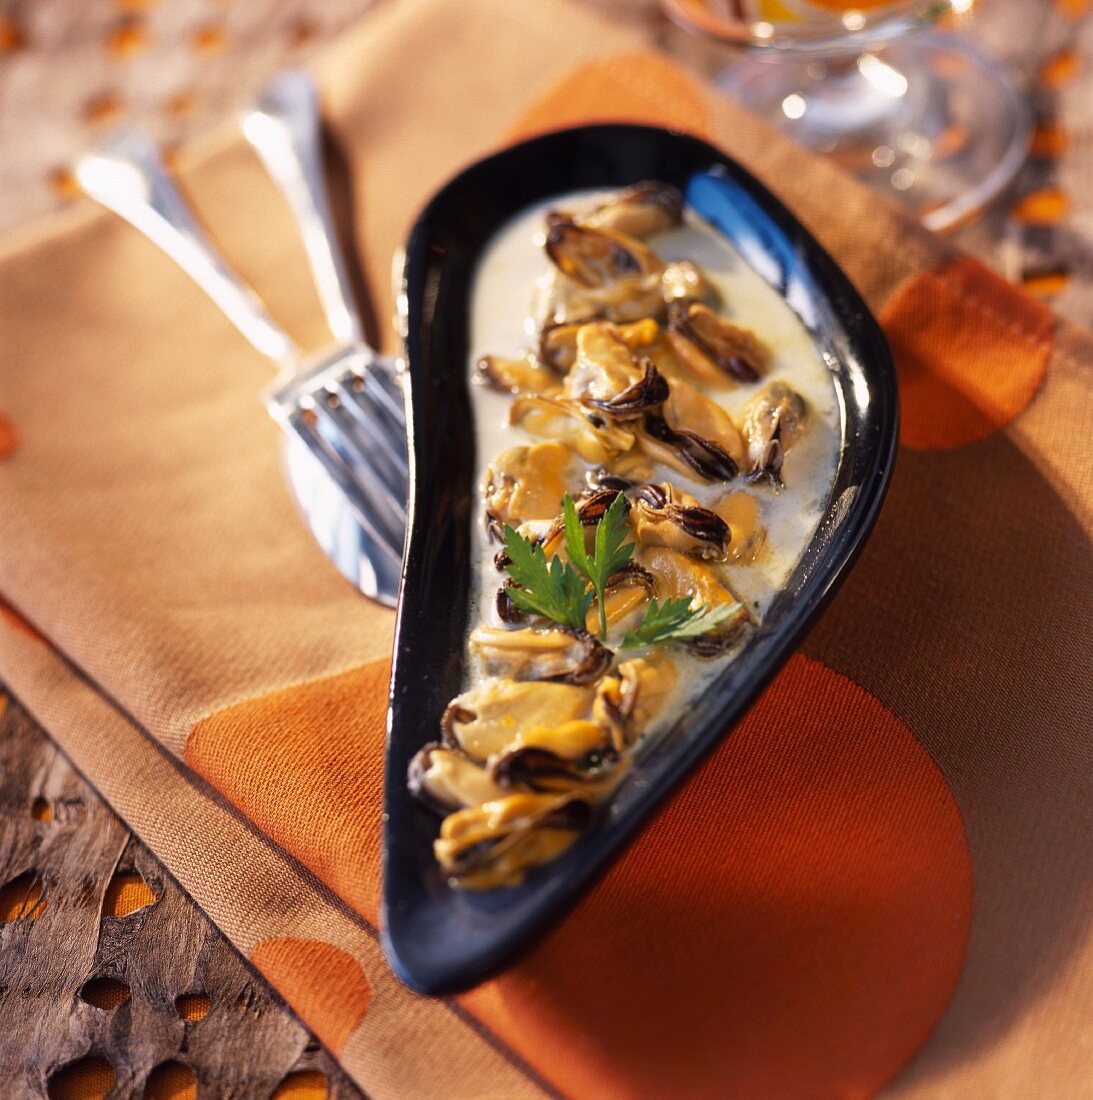 Mussels with cream